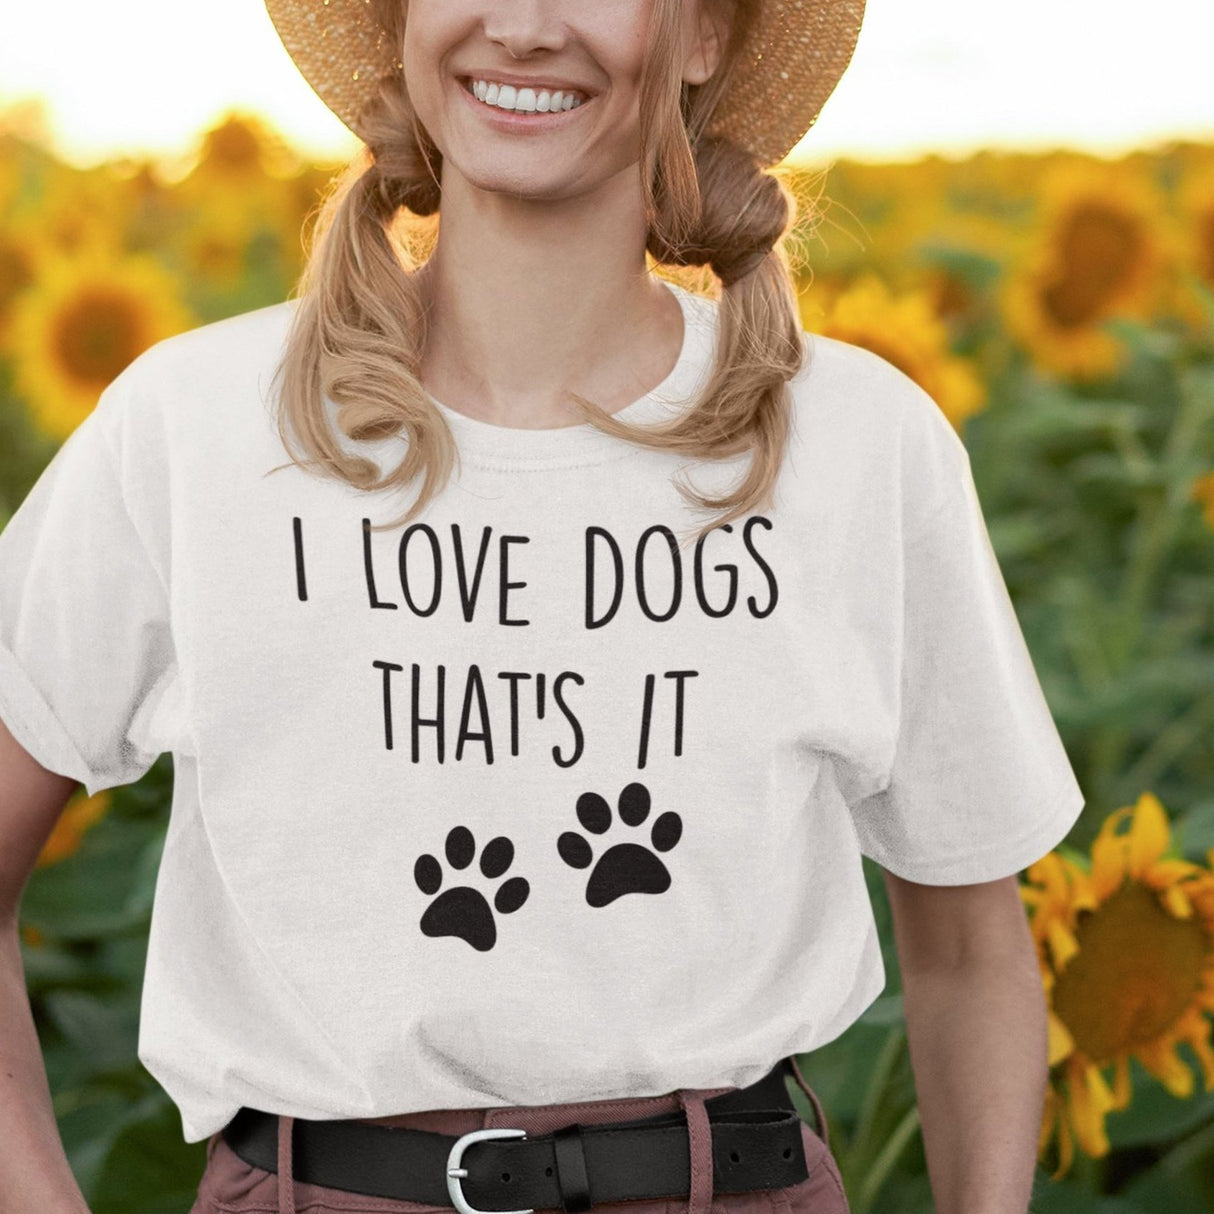 i-love-dogs-thats-it-dog-tee-love-t-shirt-owner-tee-pets-t-shirt-animals-tee#color_white